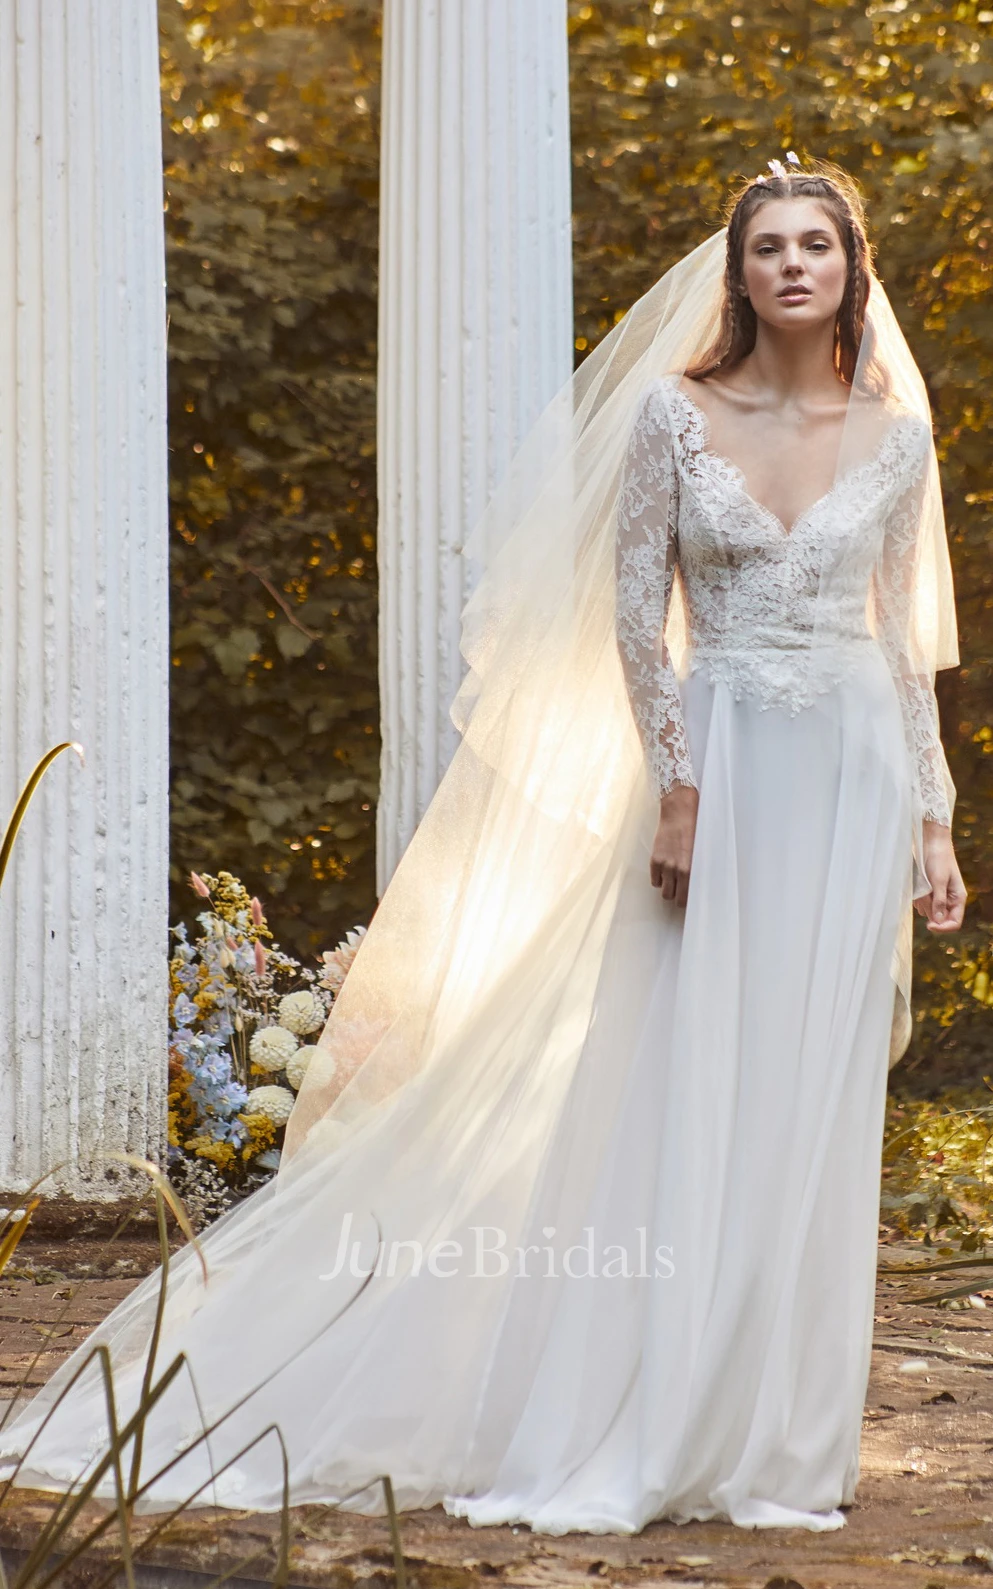 Cap Sleeve Plunging Neck Lace Chiffon Wedding Dress With Appliques And  Illusion Back - June Bridals